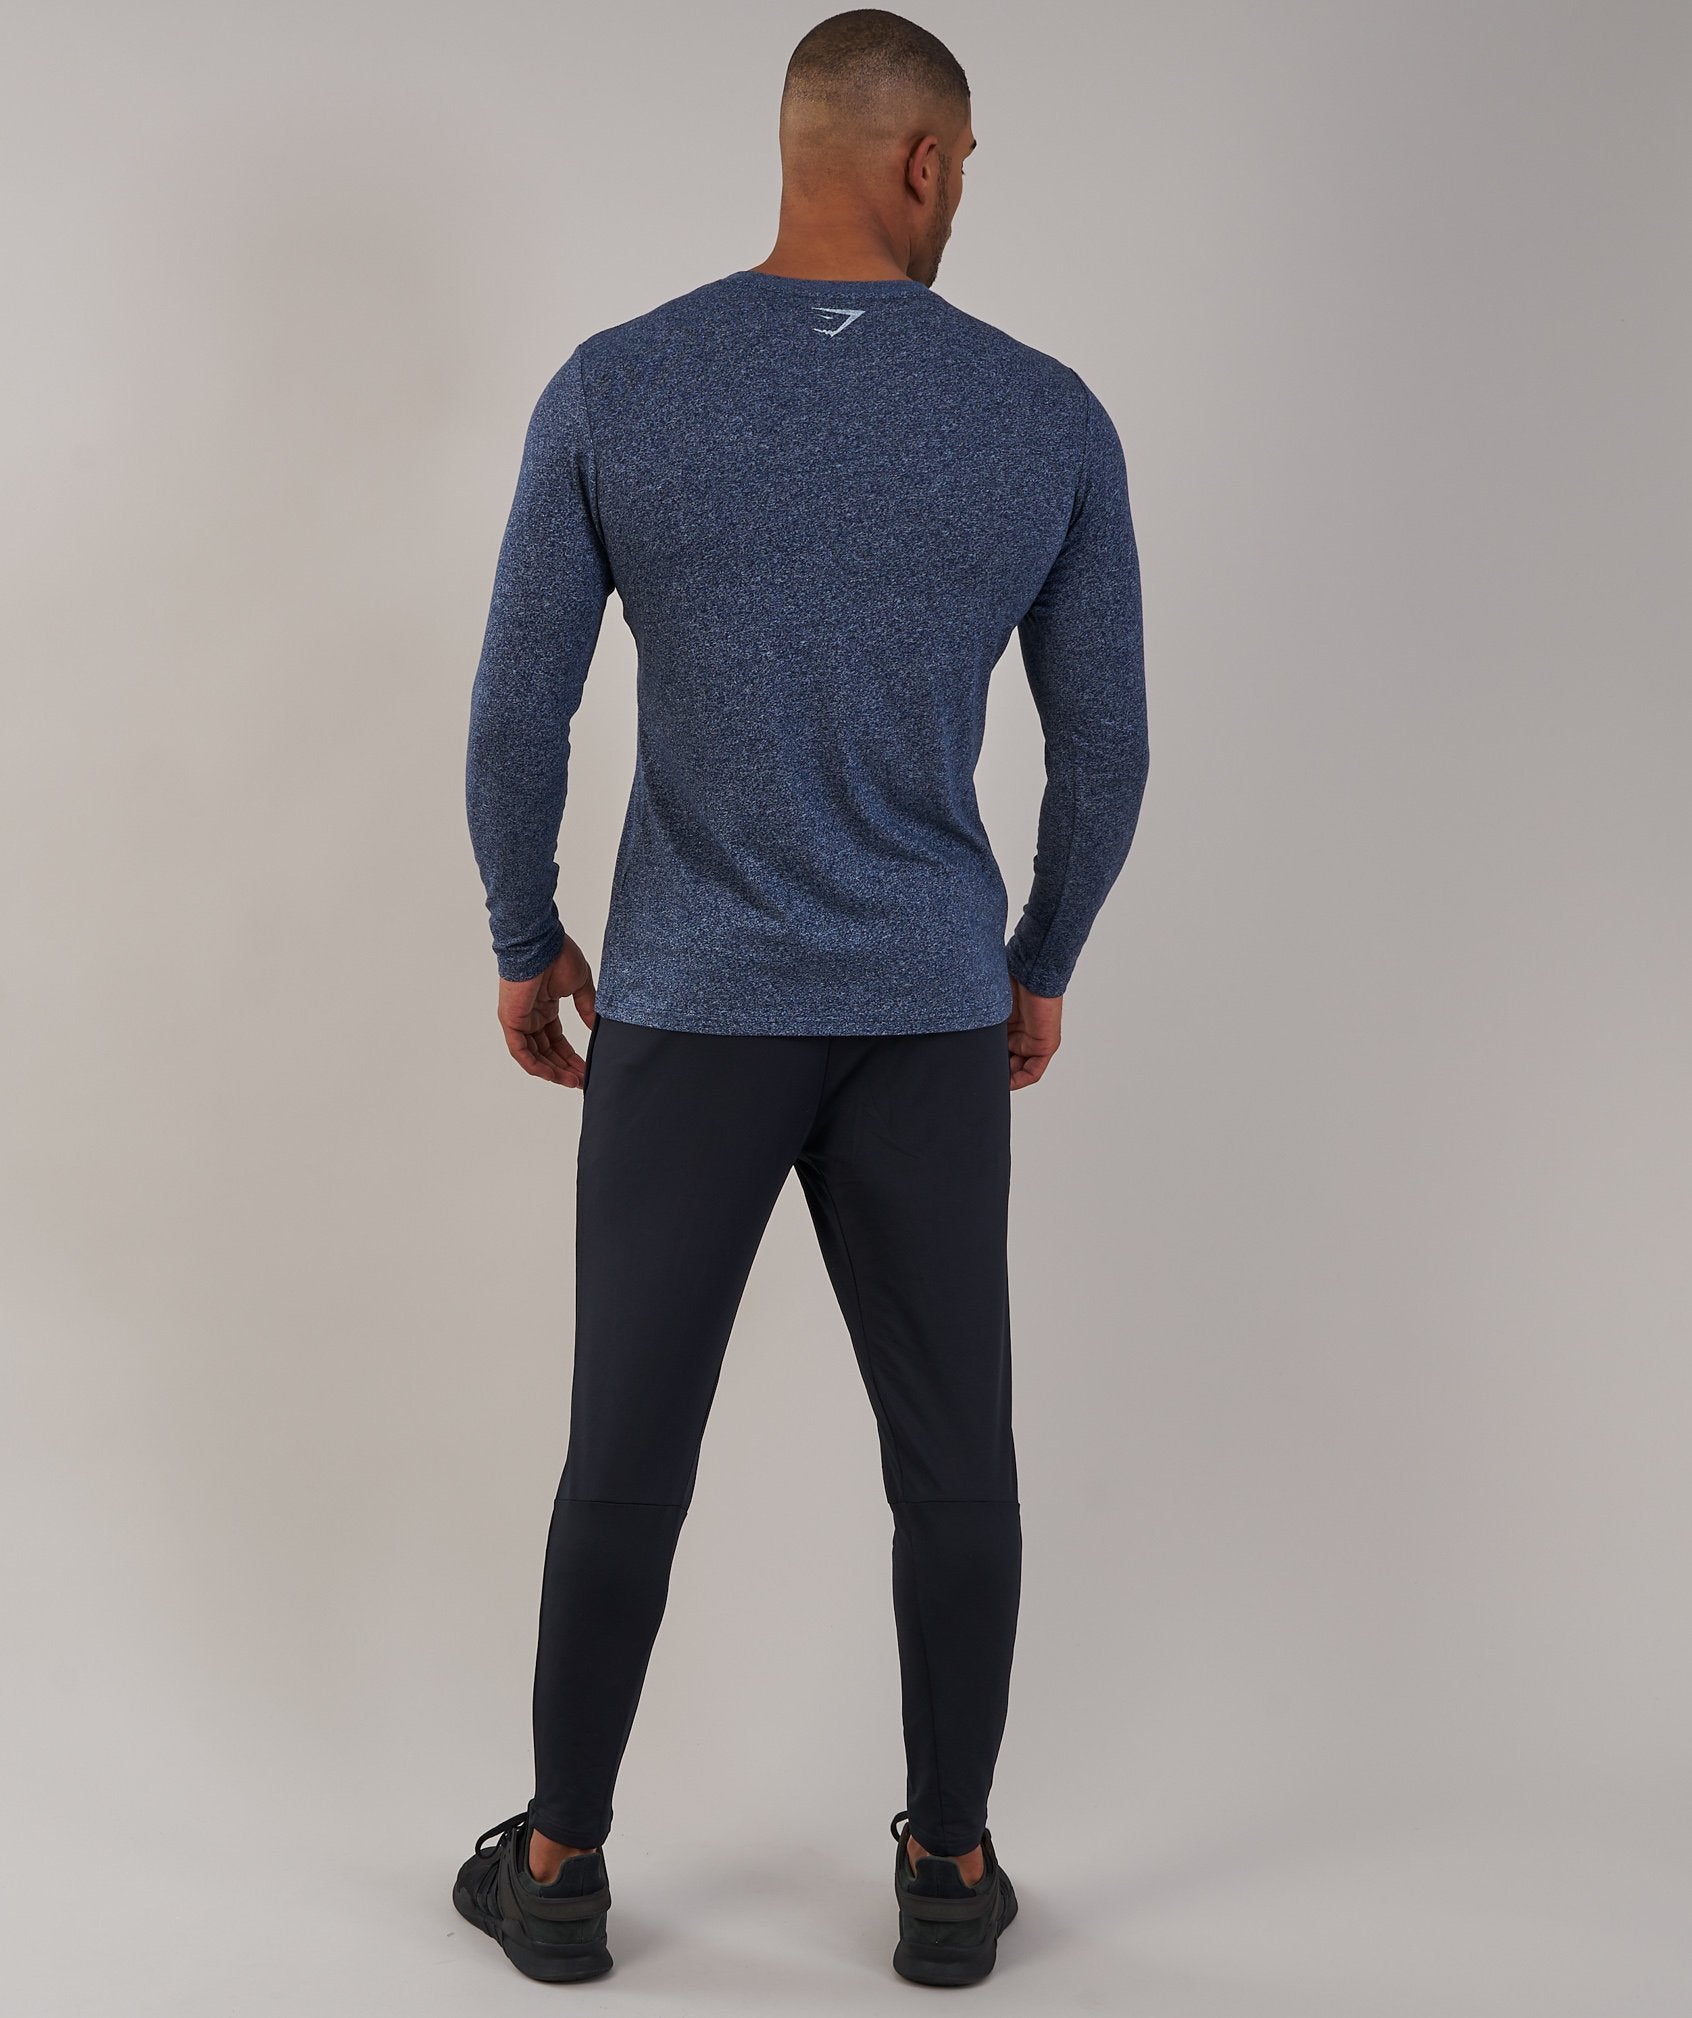 Statement Long Sleeve T-Shirt in Sapphire Blue Marl - view 3